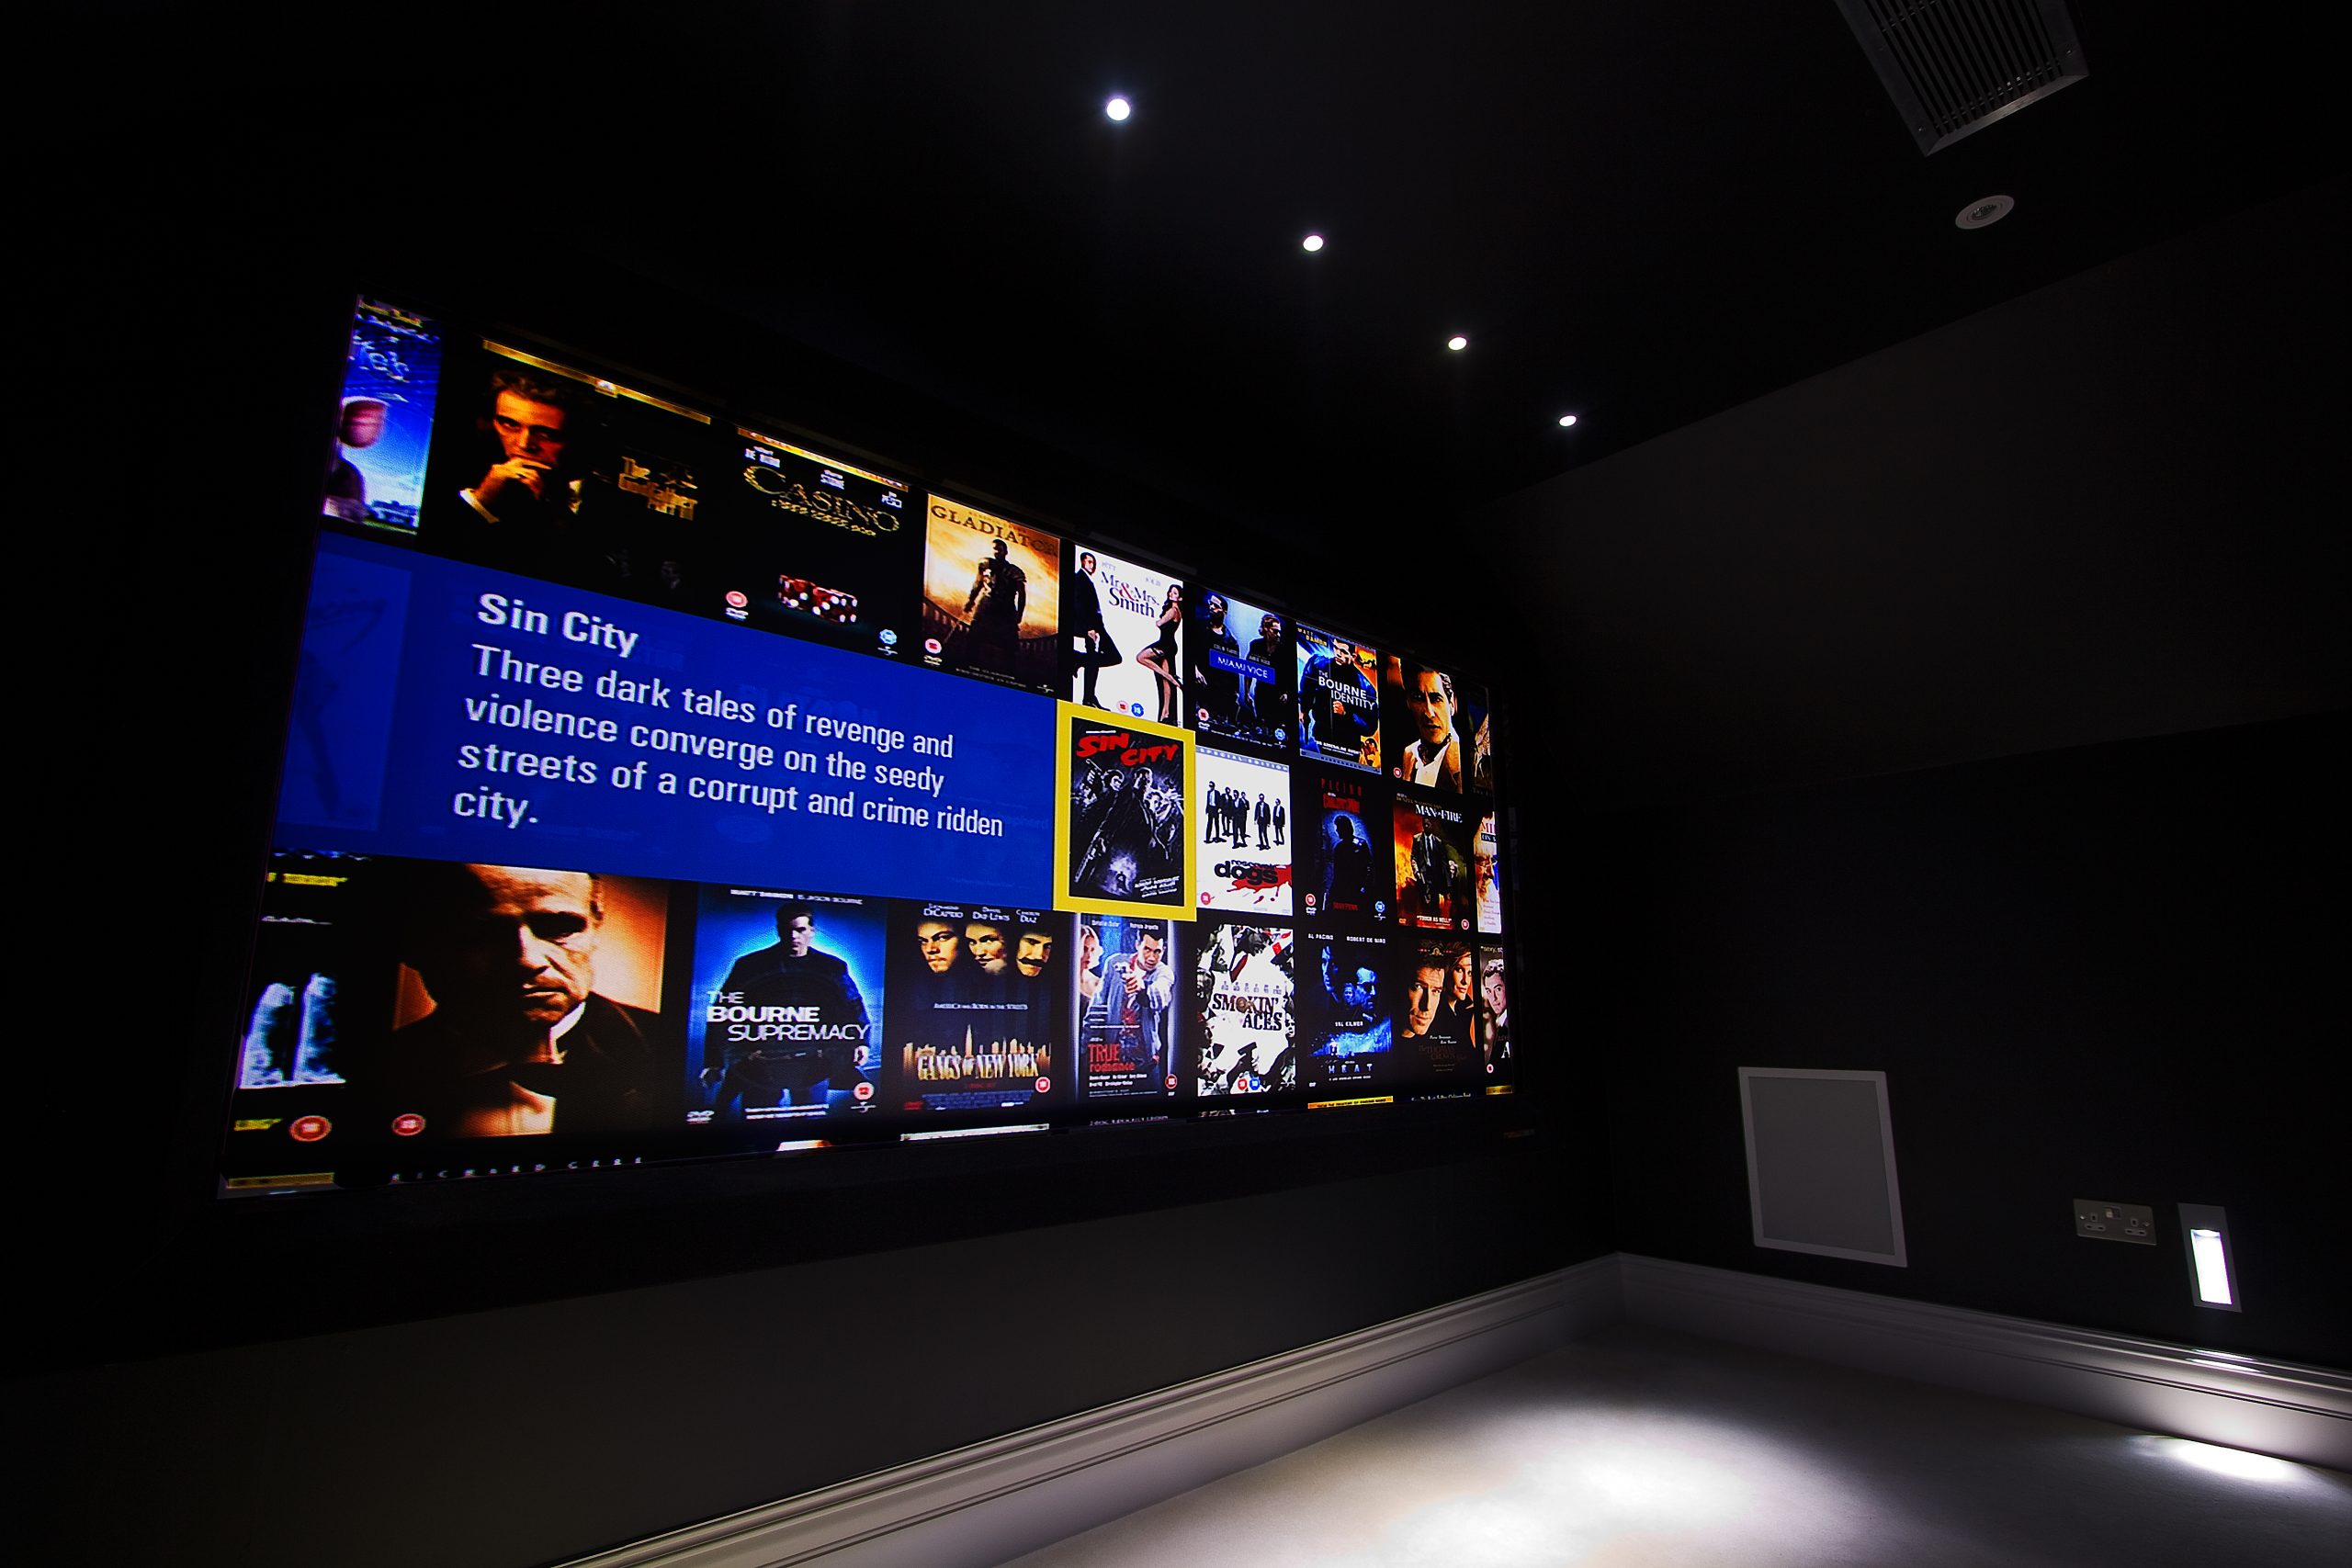 View of home cinema screen with kaleidescape movie browser.